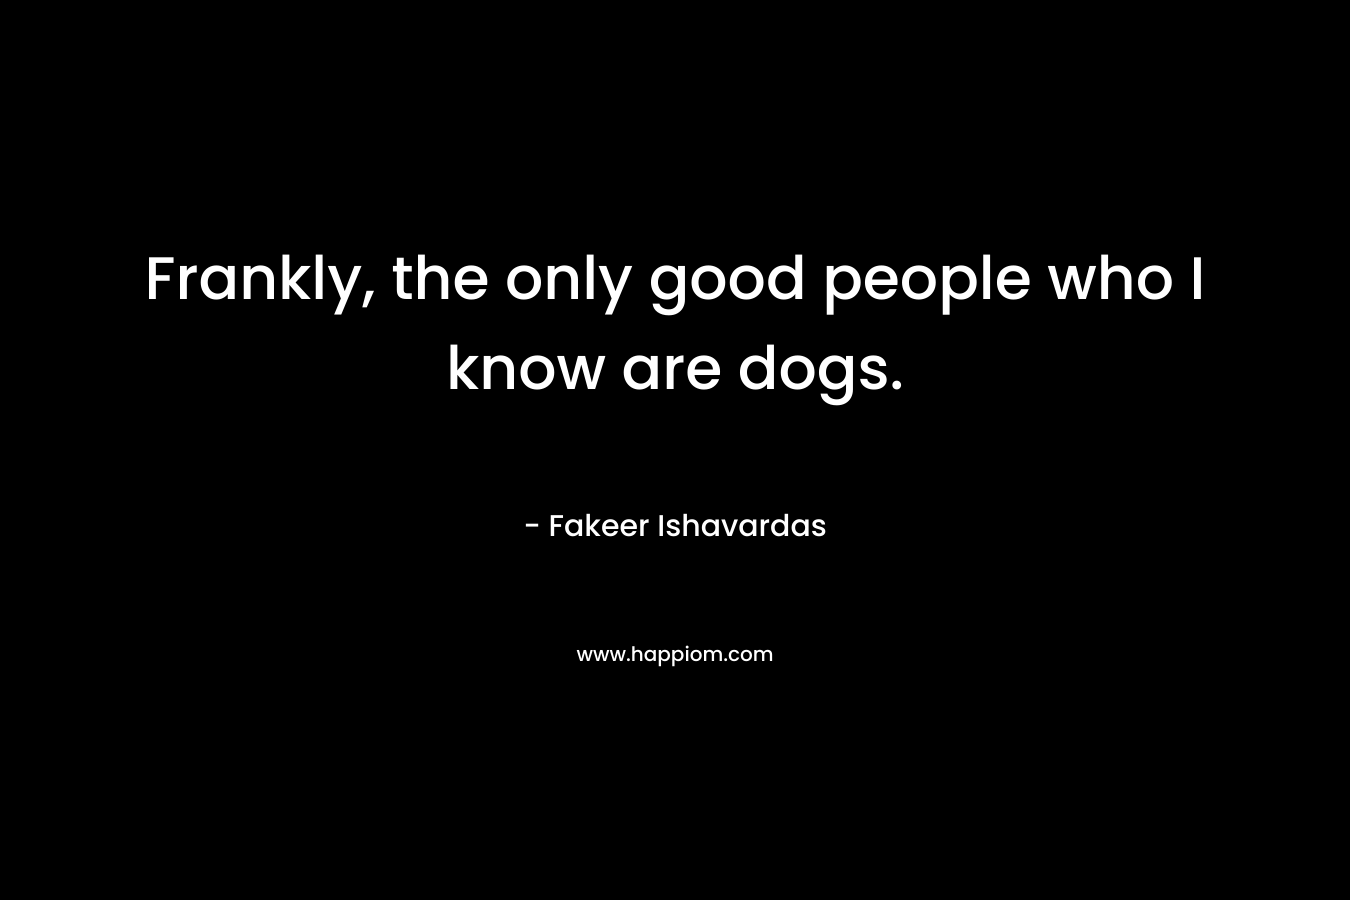 Frankly, the only good people who I know are dogs.